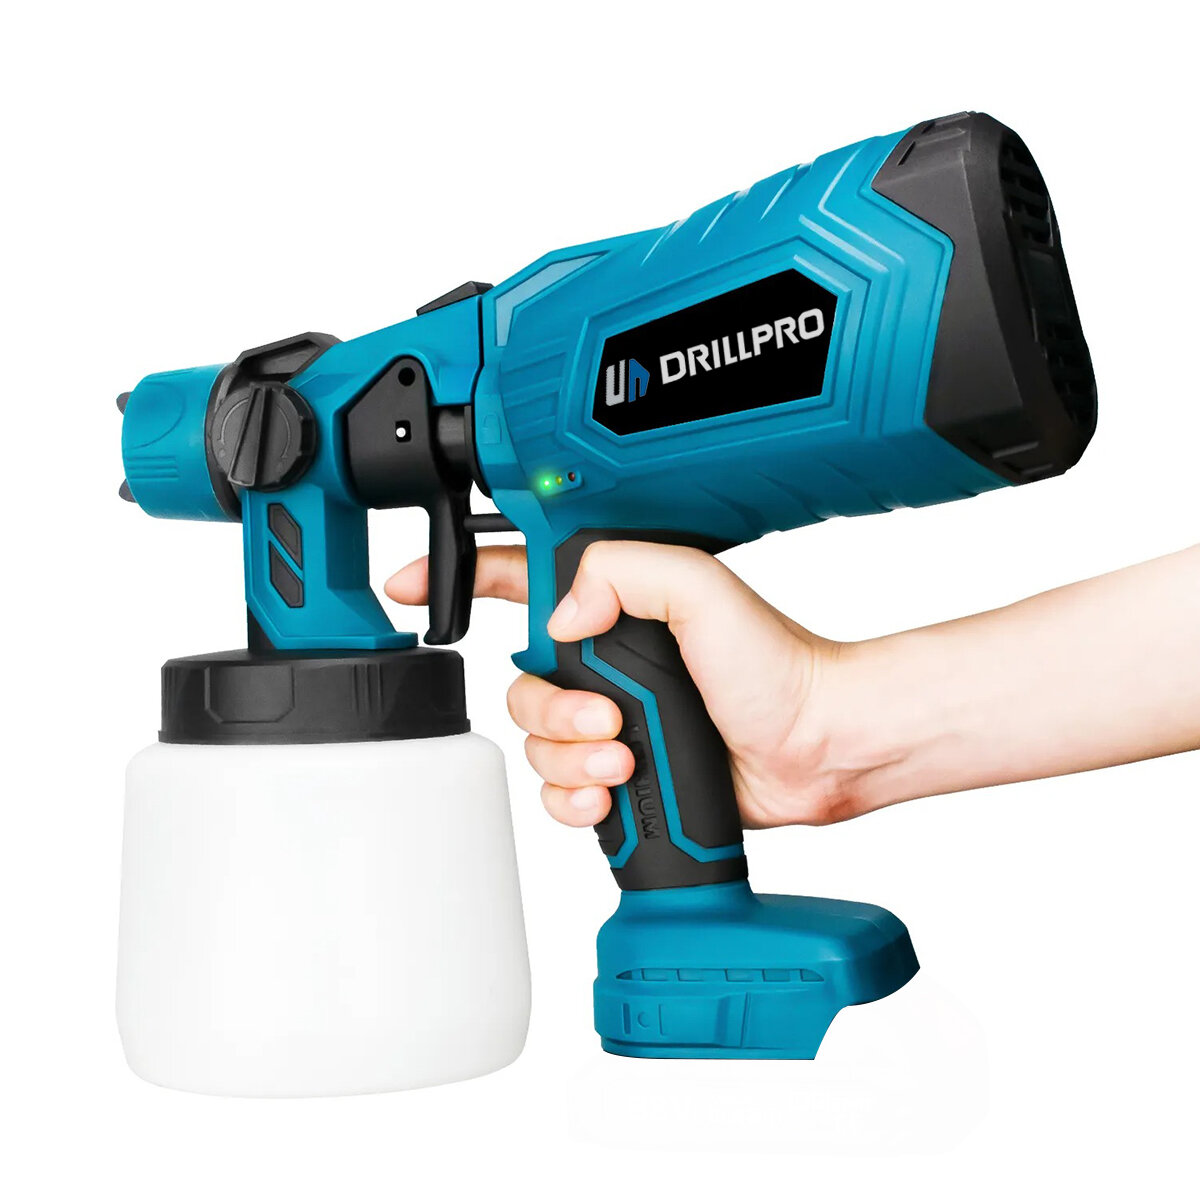 best price,drillpro,1000ml,electric,spray,for,makita,18v,discount